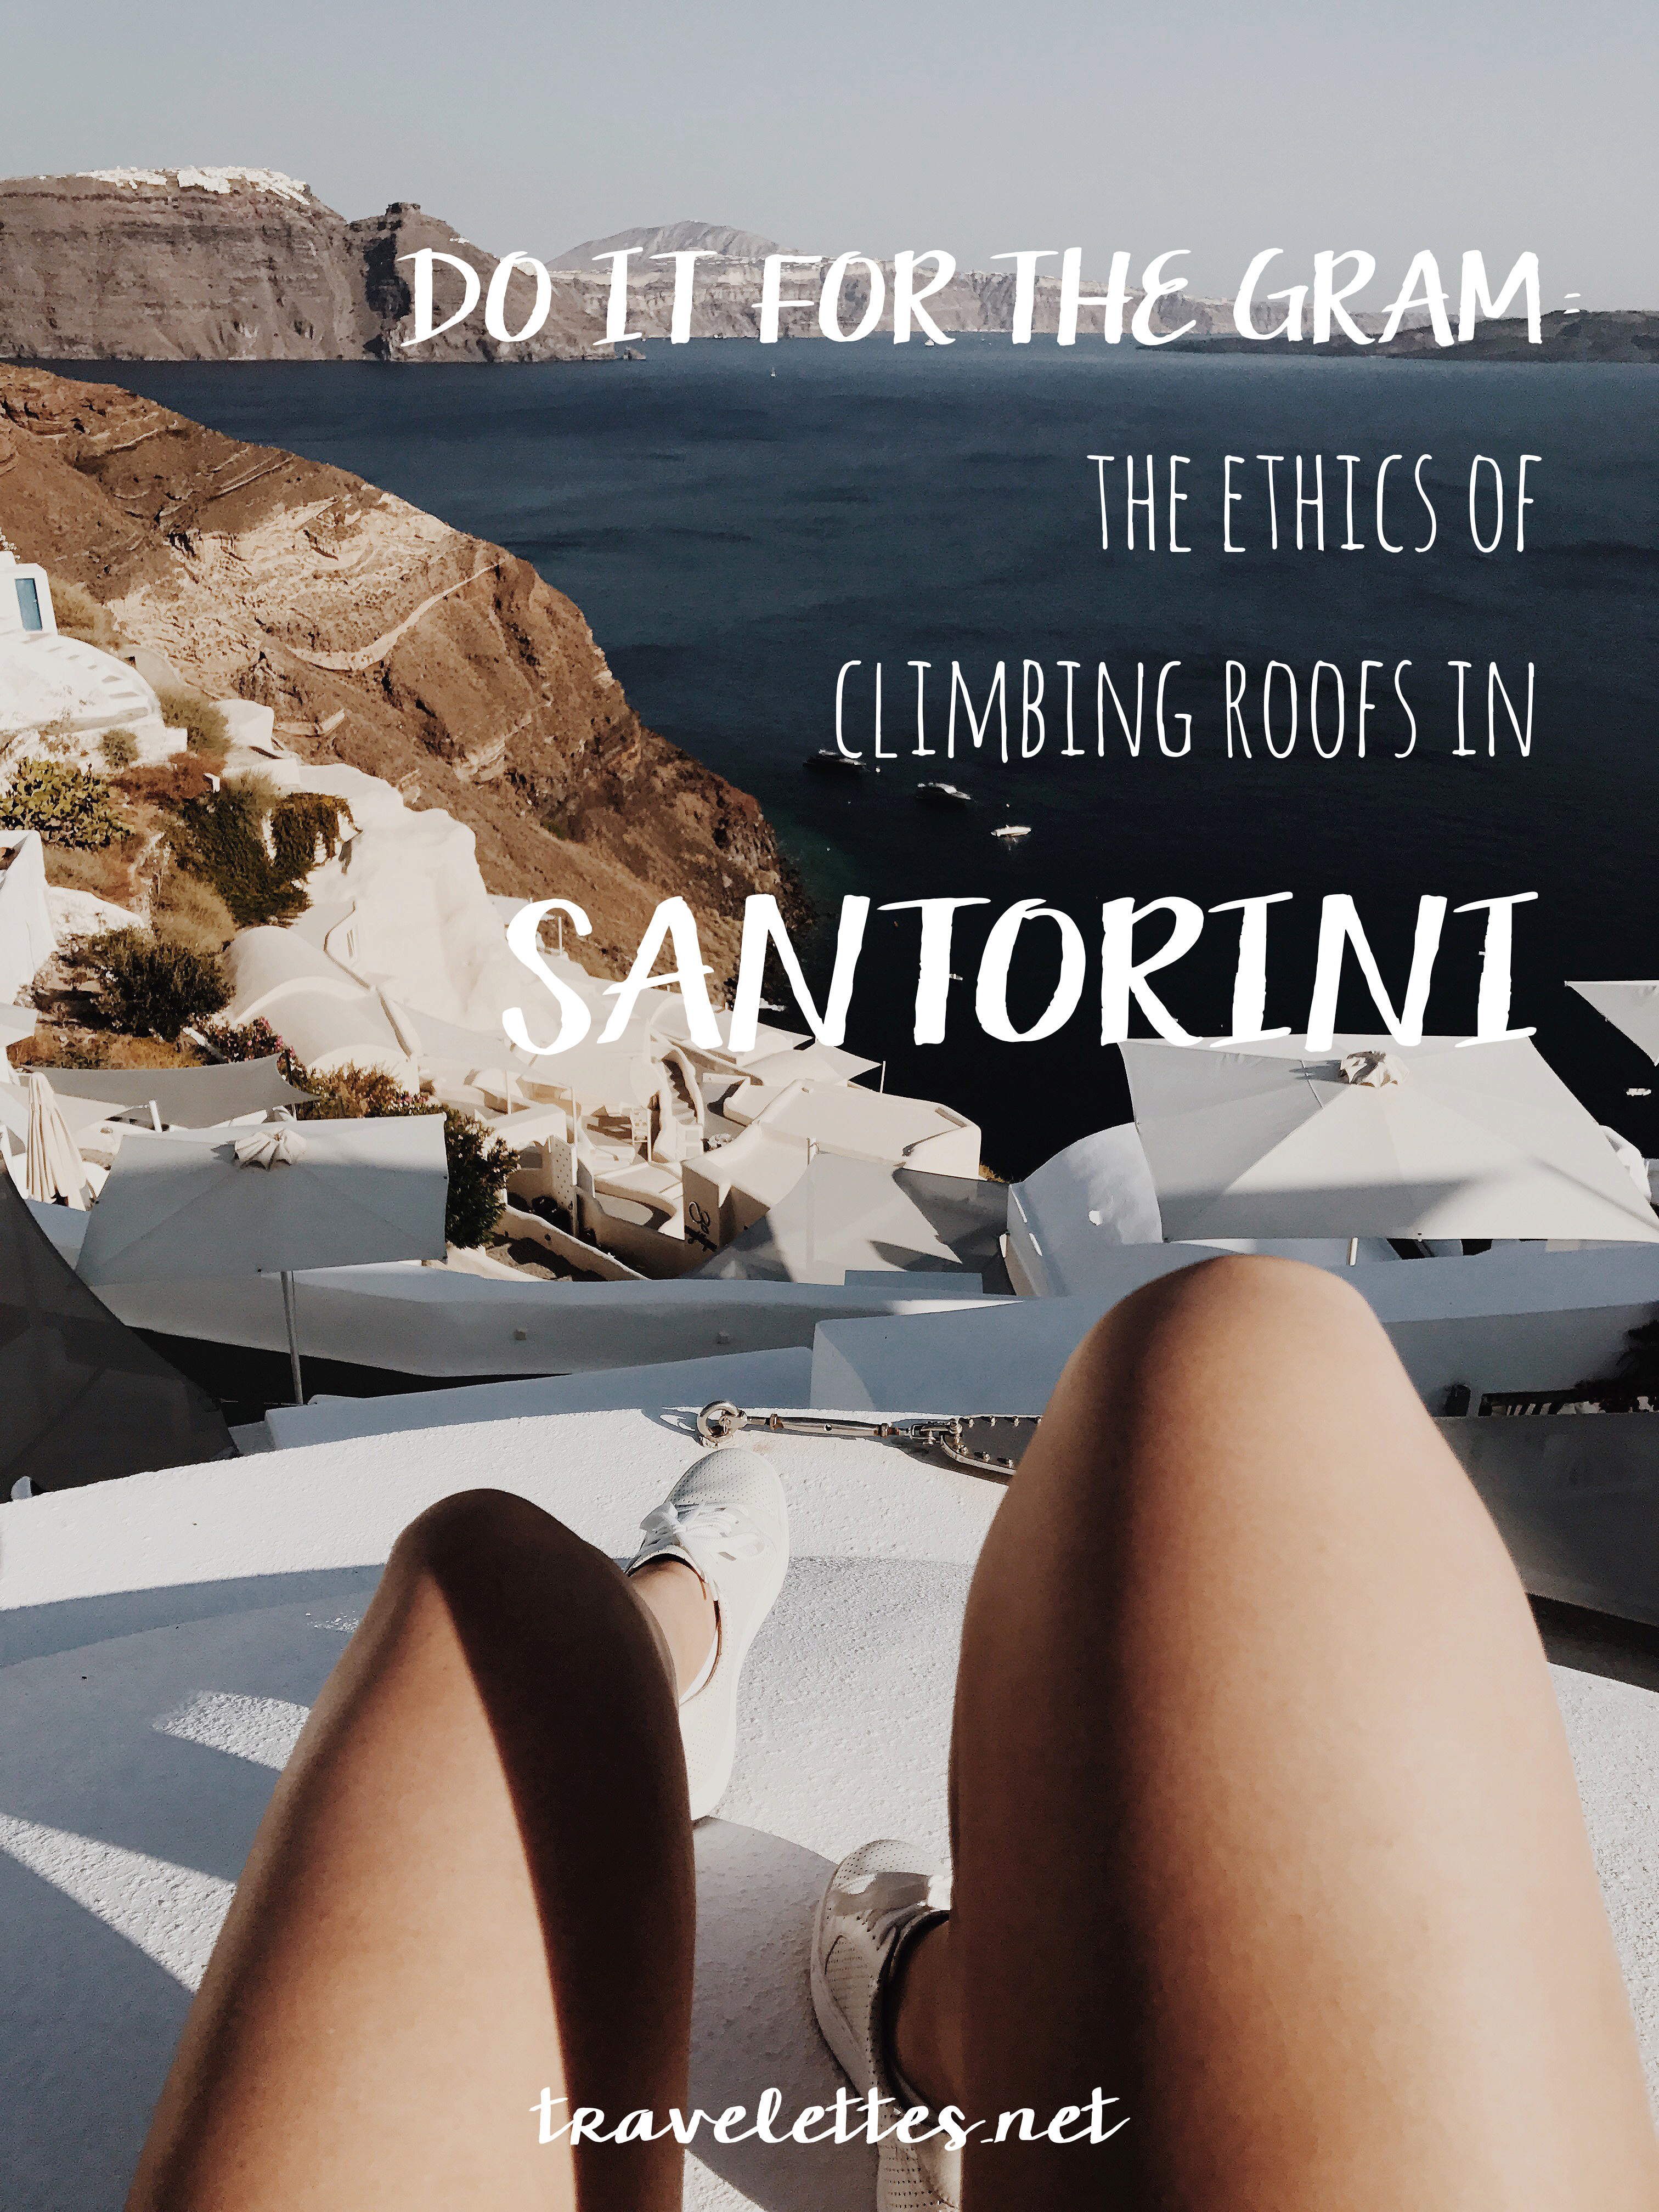 Do it for the Gram: The Ethics of Climbing Roofs in Santorini